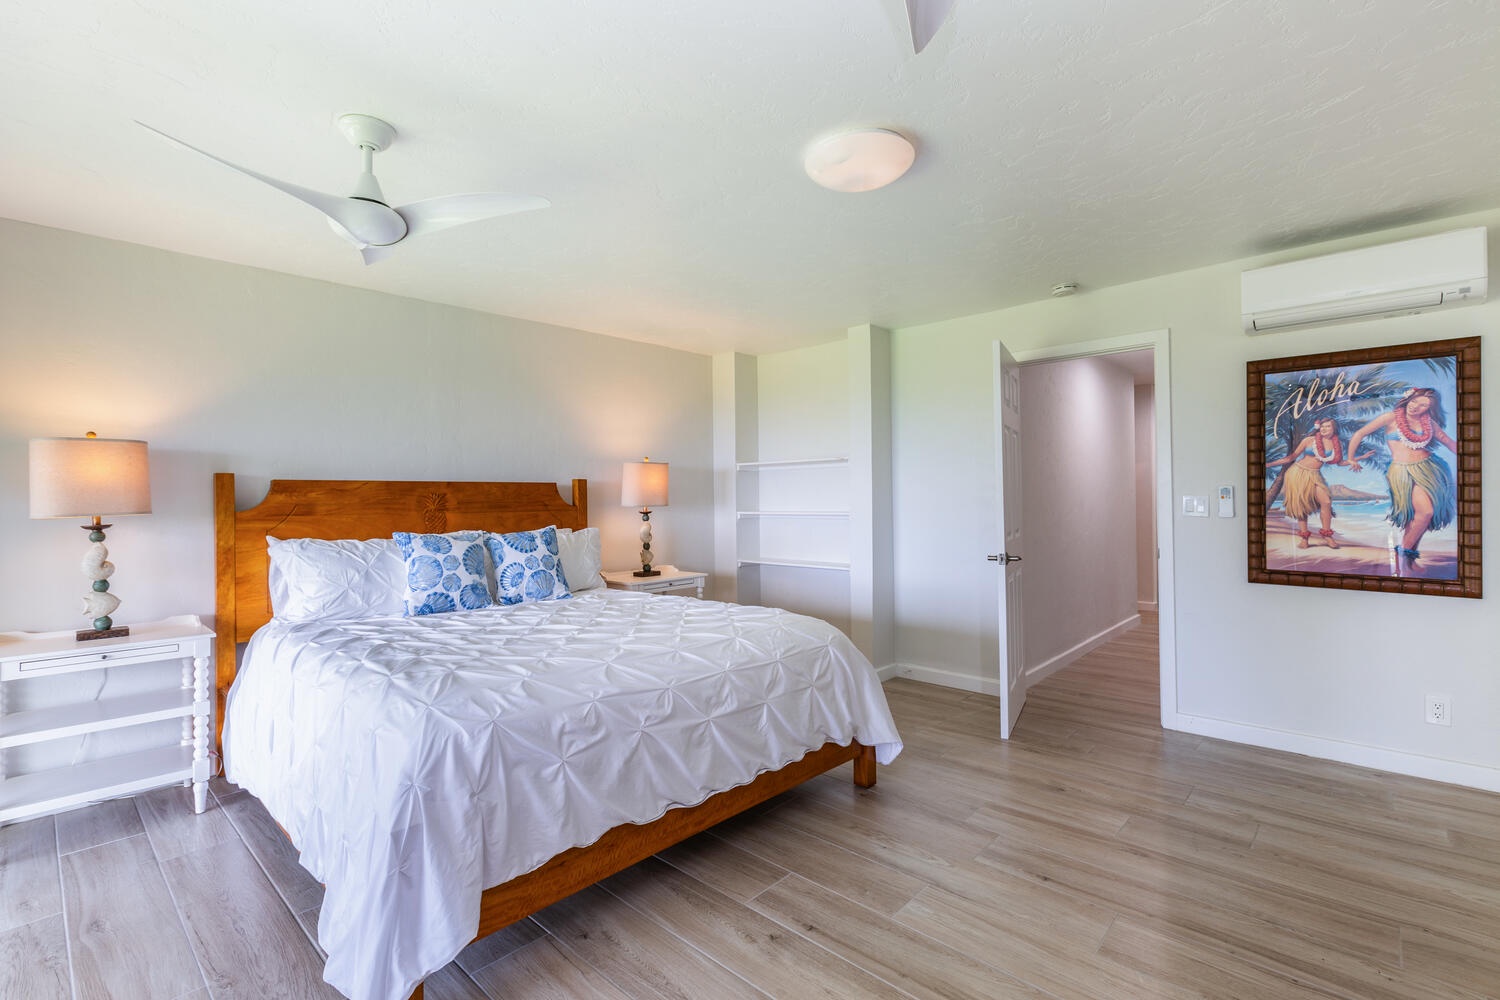 Princeville Vacation Rentals, Wai Lani - Guest Room 2 - Spacious and airy bedroom with a king-sized bed and minimalist decor.